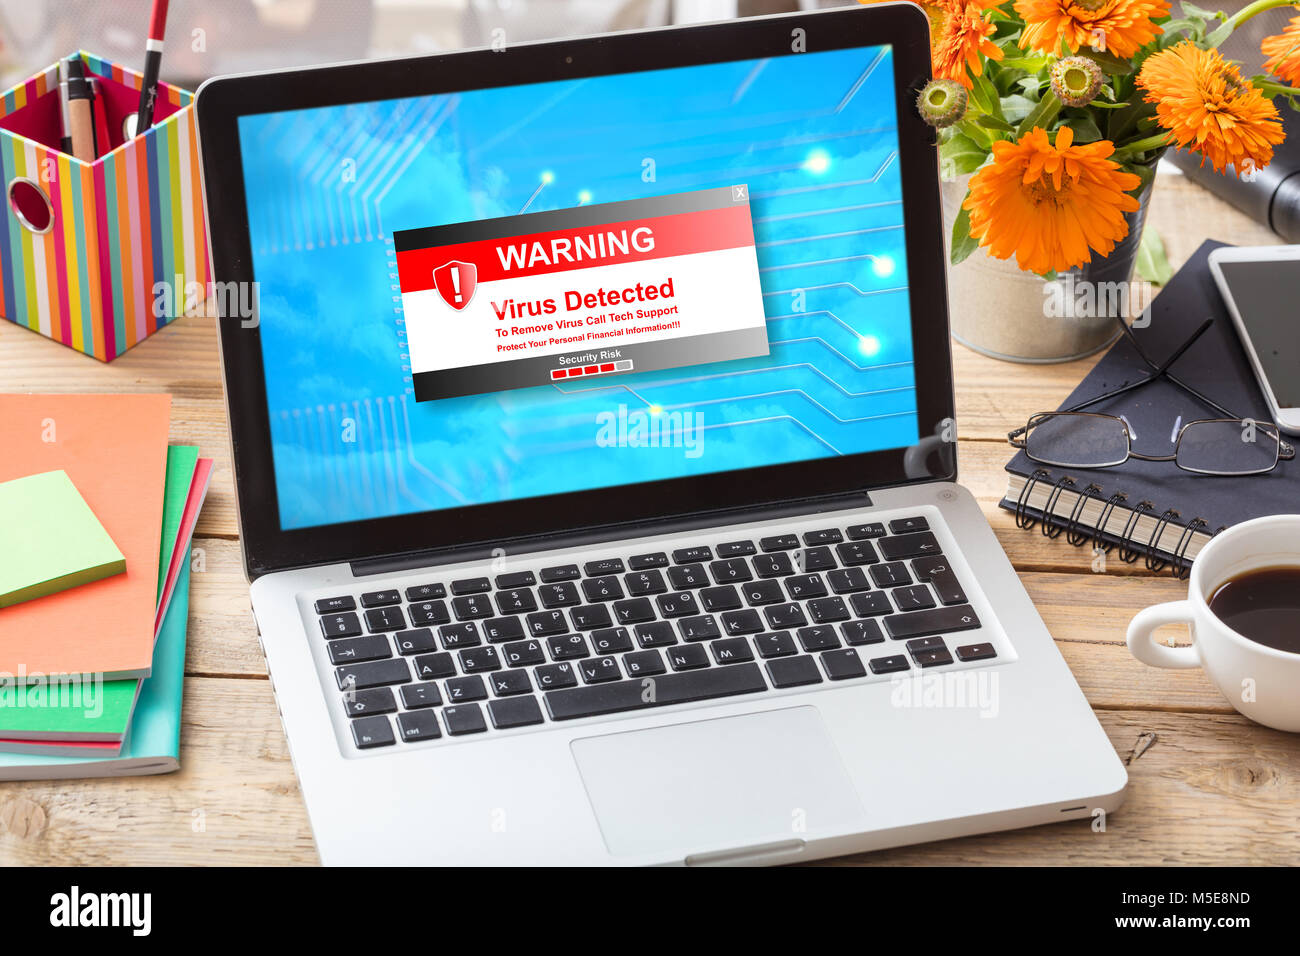 Virus detected warning message on a computer screen on a wooden office desk Stock Photo